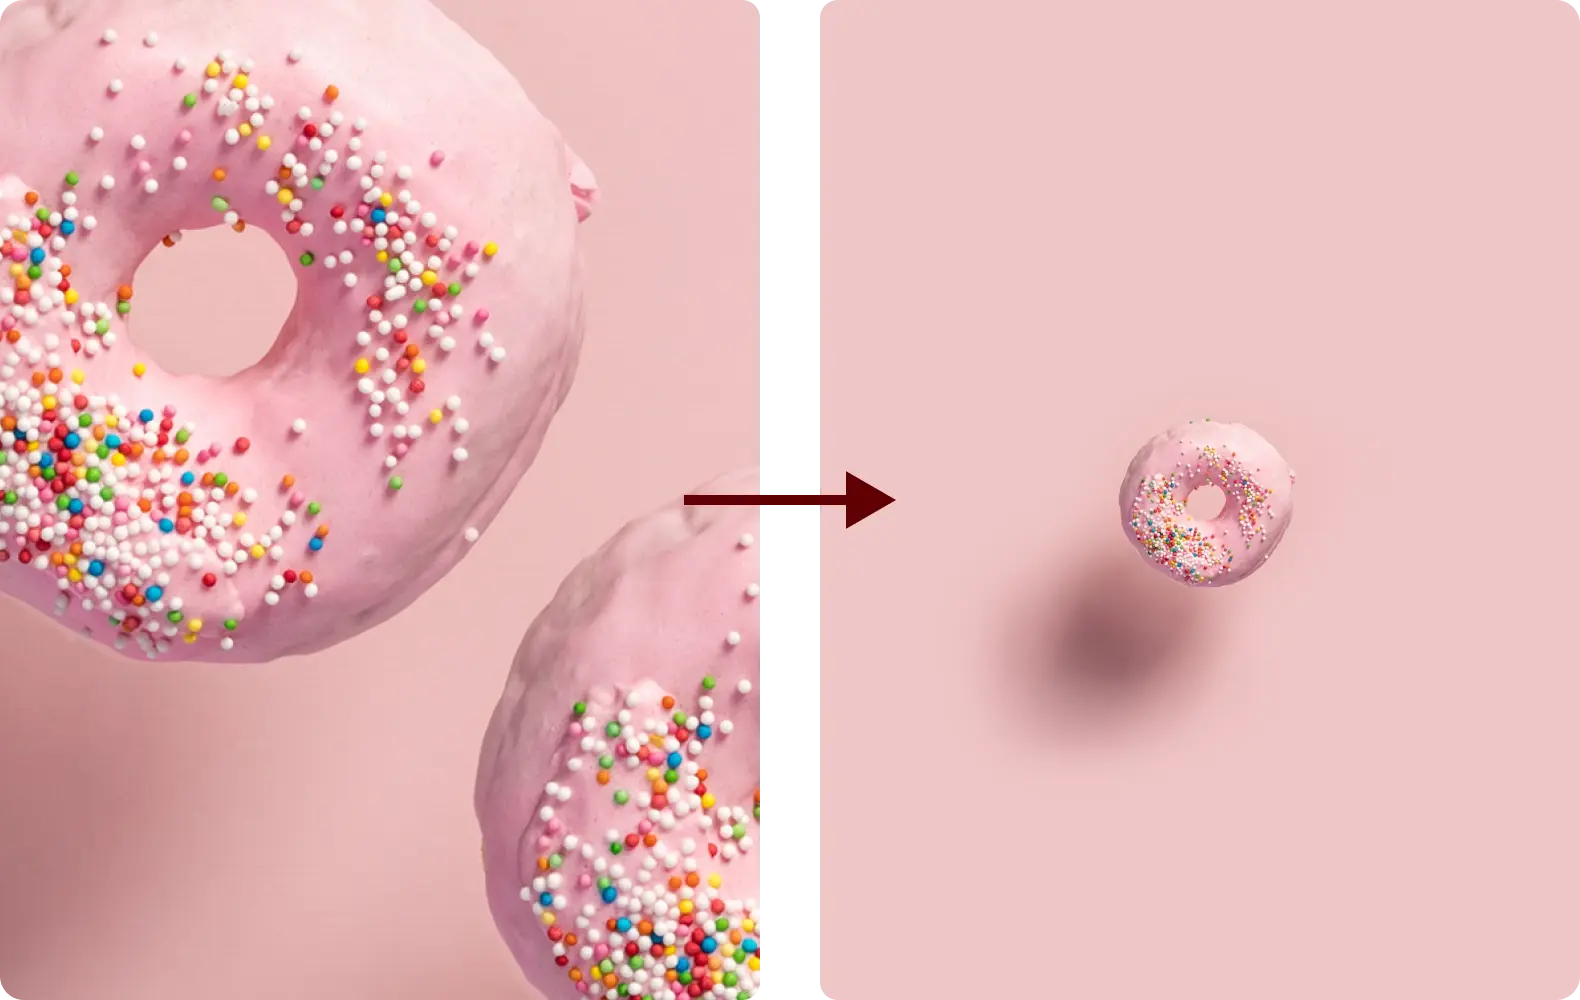 Side-by-side images of doughnuts. The image on the left is a tight crop with very little negative space around the doughnut. The image on the right is a single doughnut with lots of space around it.